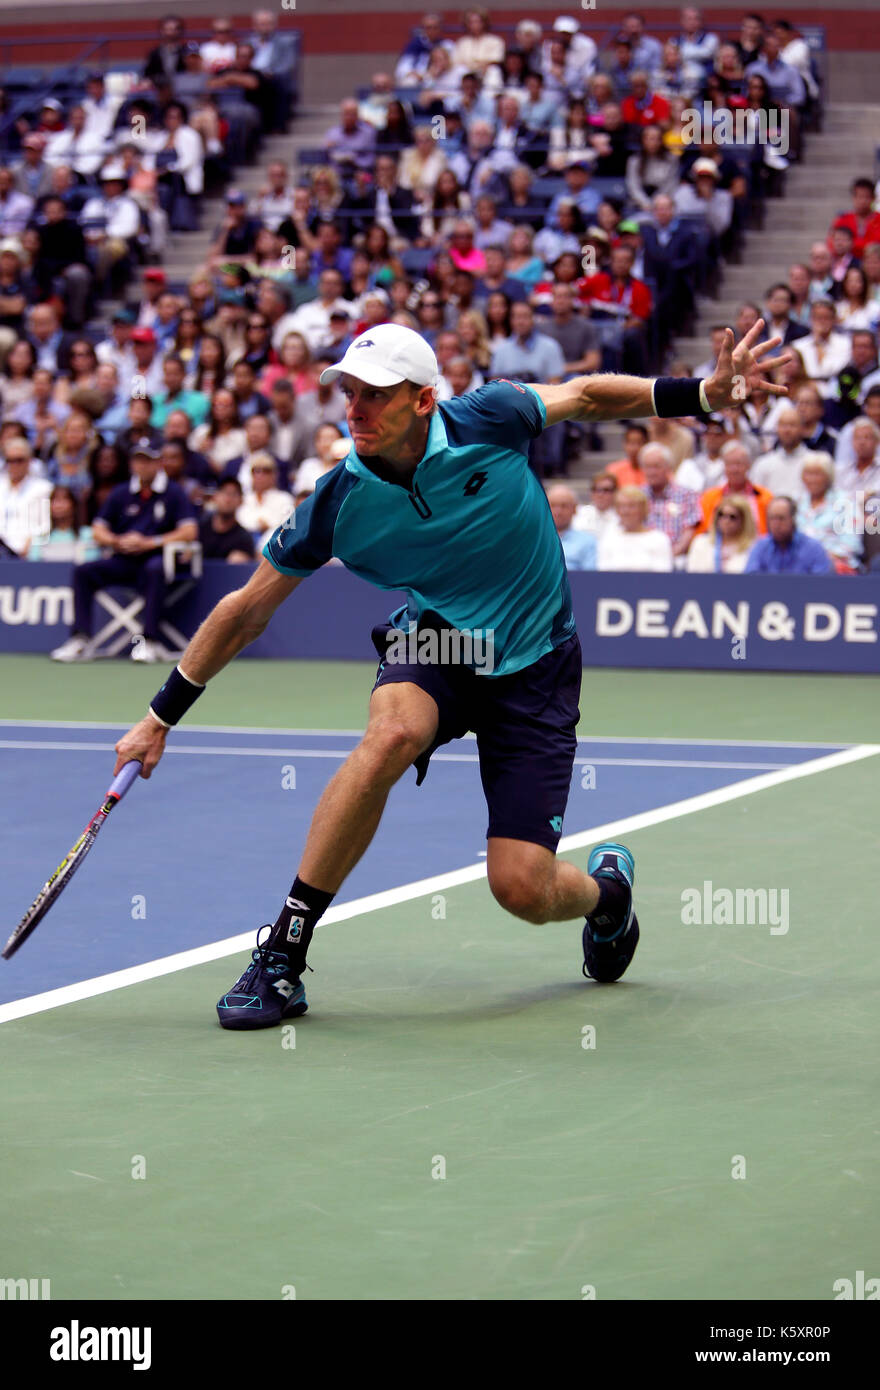 New York, United States. 10th Sep, 2017. US Open Tennis: New York, 10 September, 2017 - Kevin Anderson of South Africa reaches for a backhand return to Rafael Nadal of Spain during the US Open Men's singles final in Flushing Meadows, New York. Nadal won the match in three sets to win the title Credit: Adam Stoltman/Alamy Live News Stock Photo